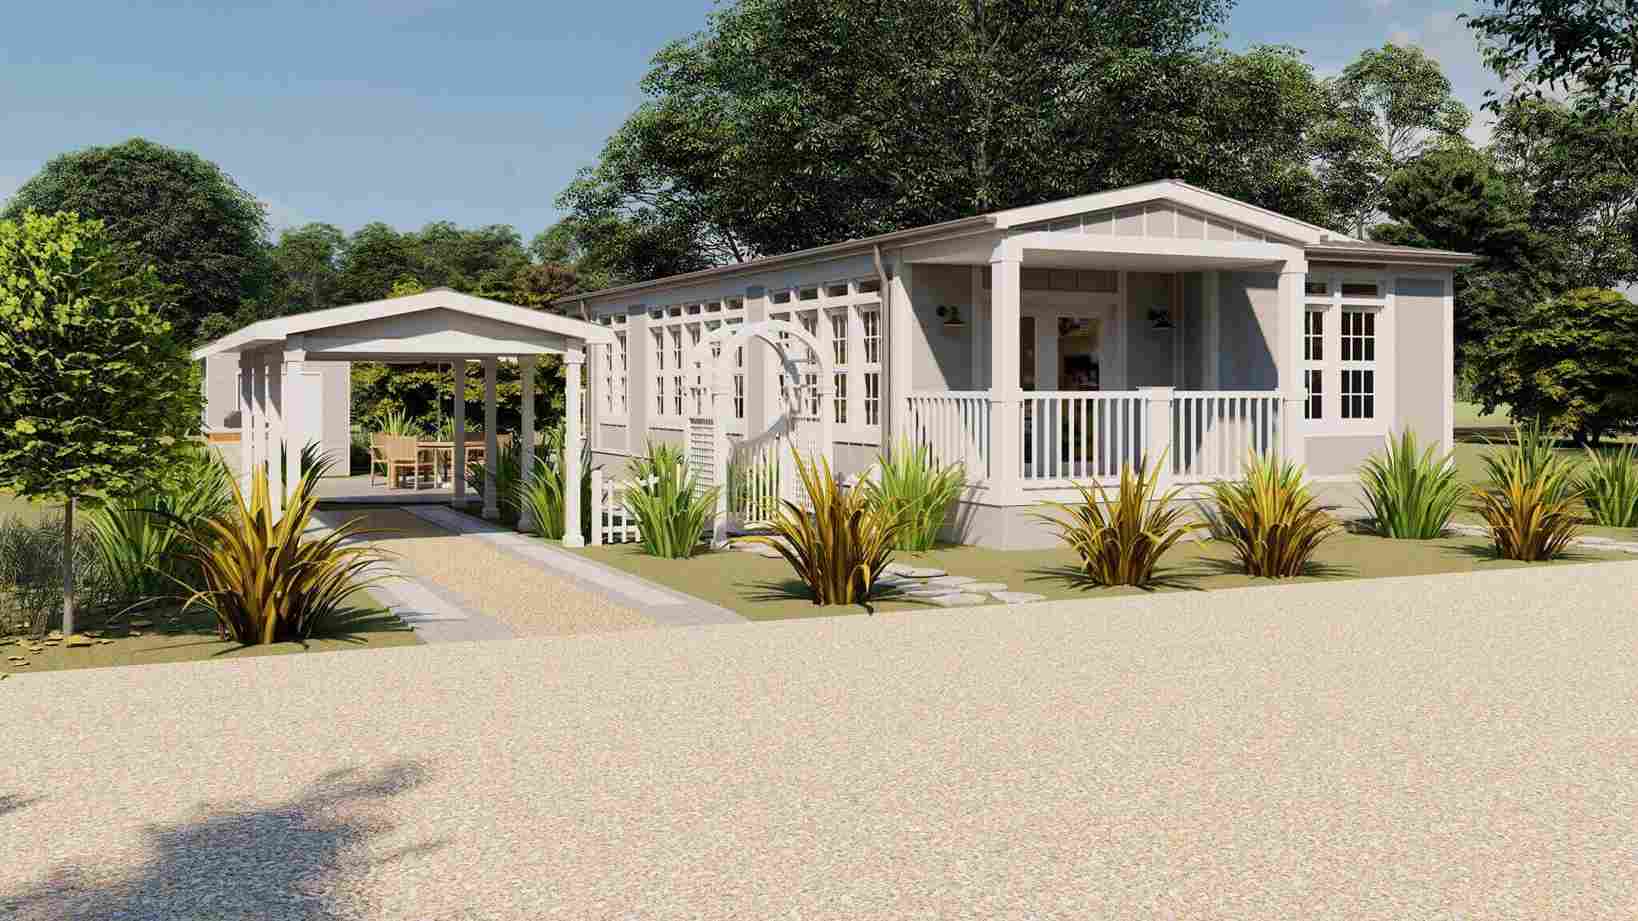 Introducing the Brand-New Sunny Isle Cottage!